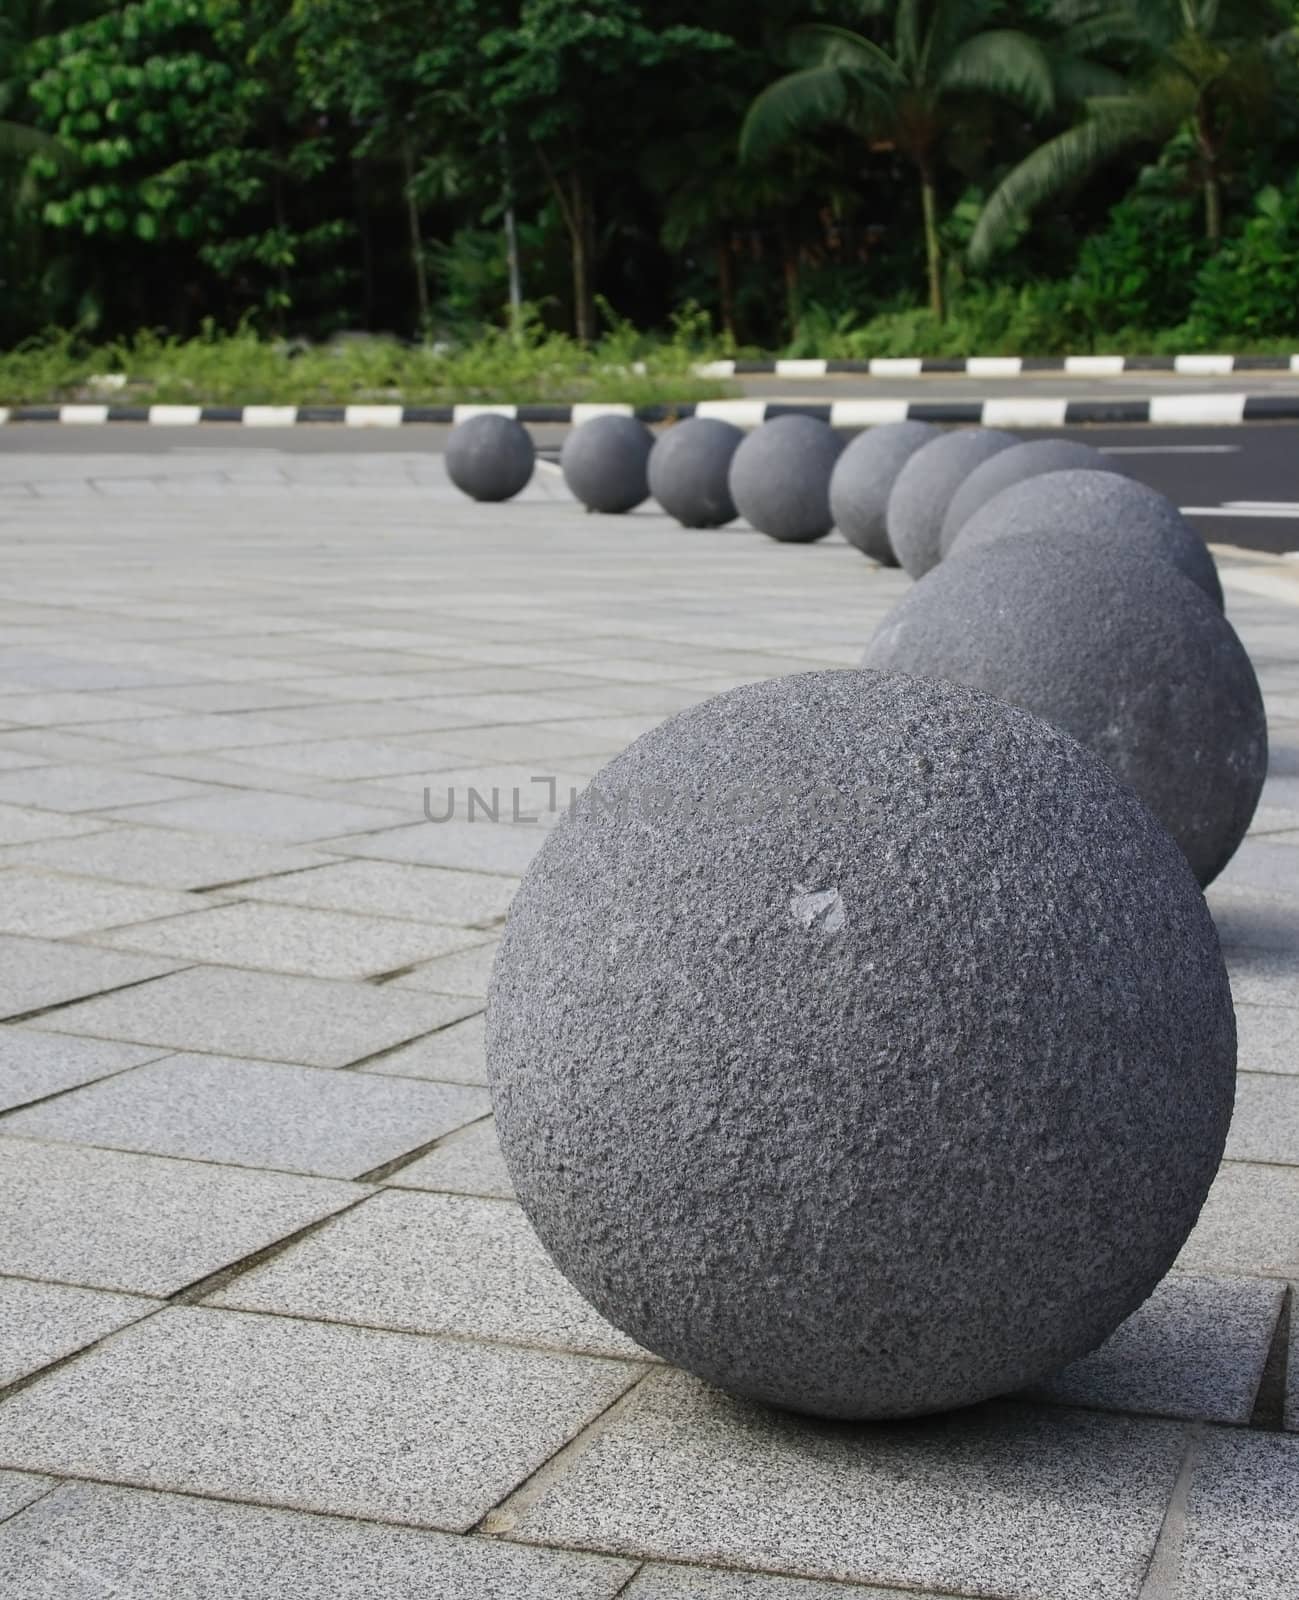 A set of round sculpture in front of Singapore botanical garden.